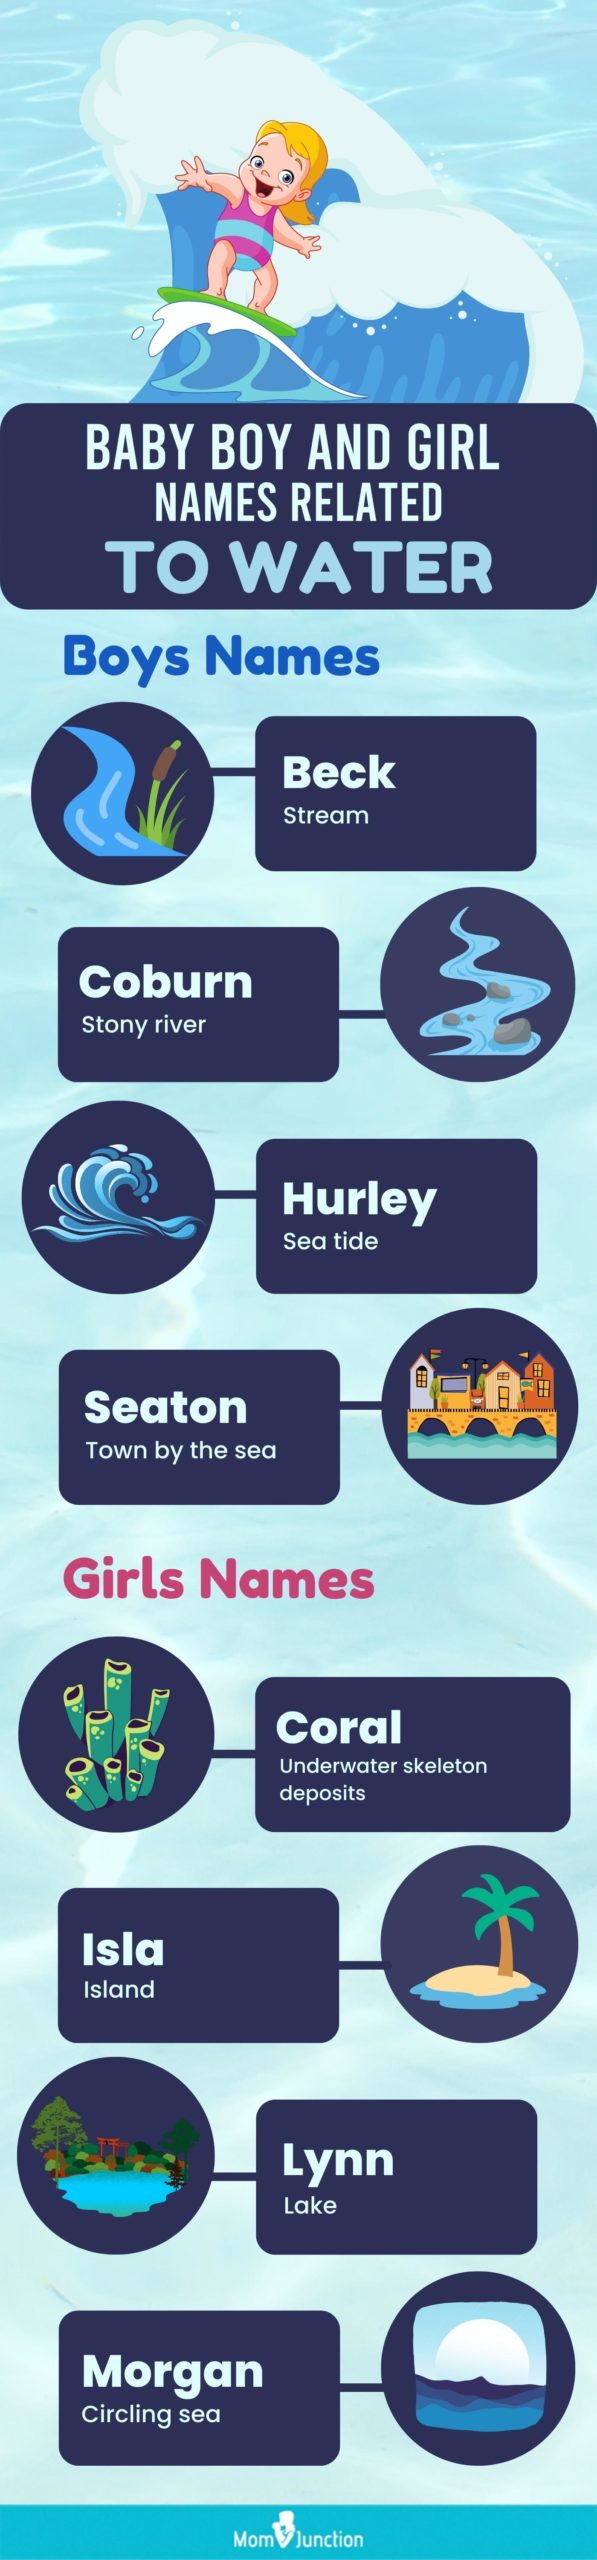 baby boy and girl names related to water [infographic]